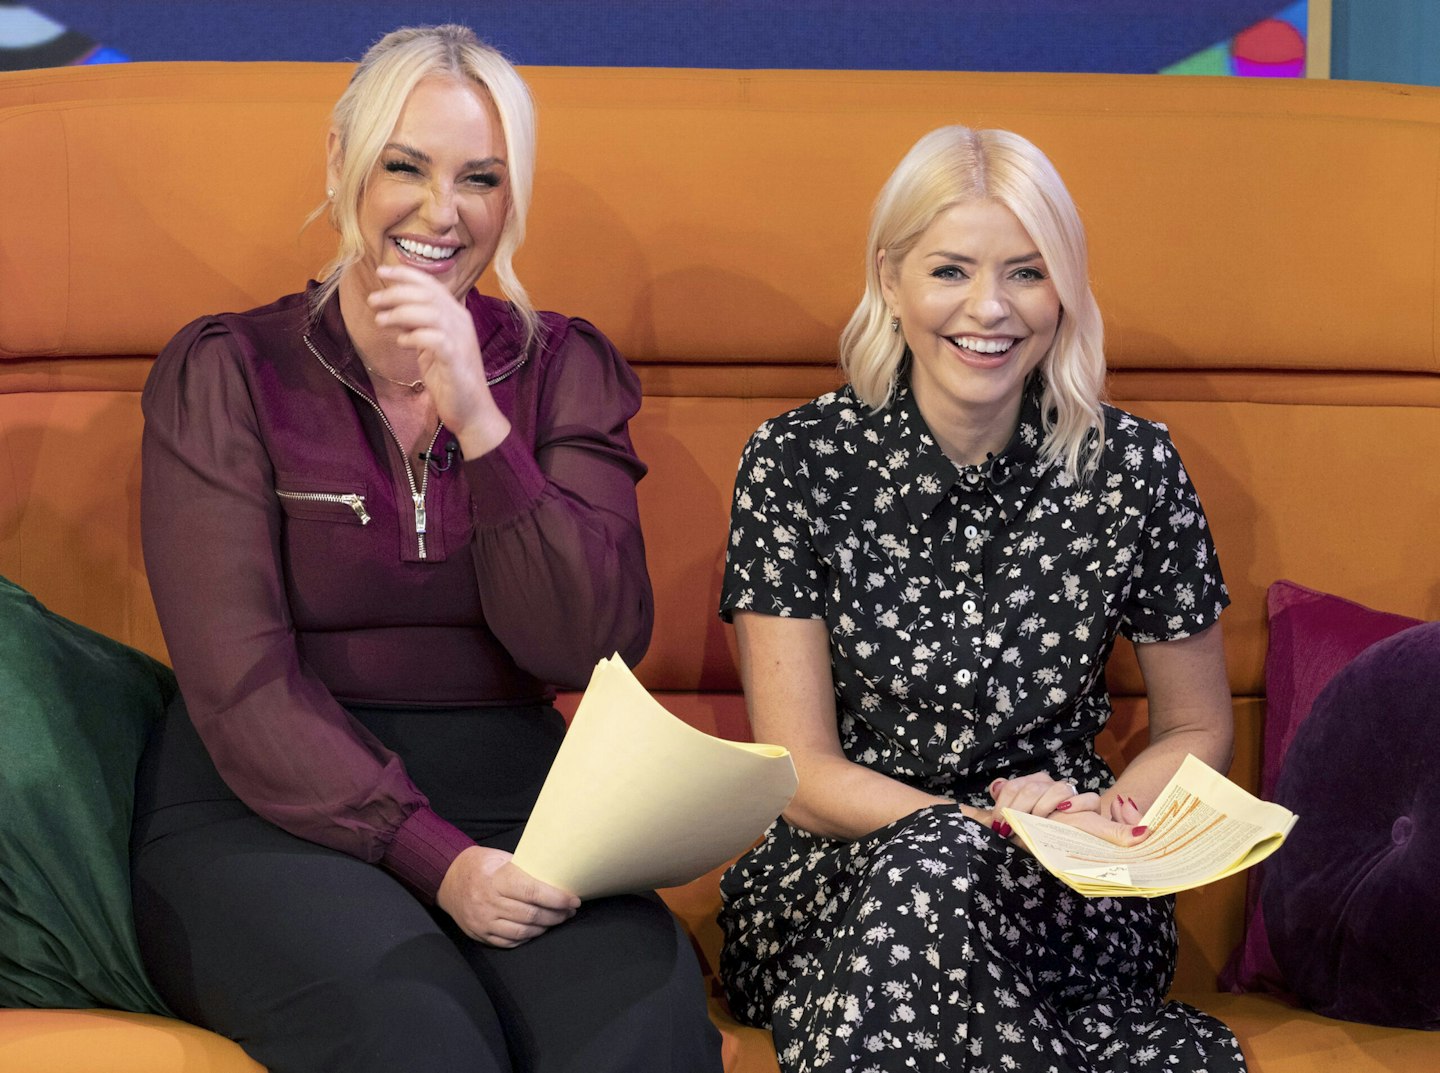 Josie gibson and Holly Willoughby